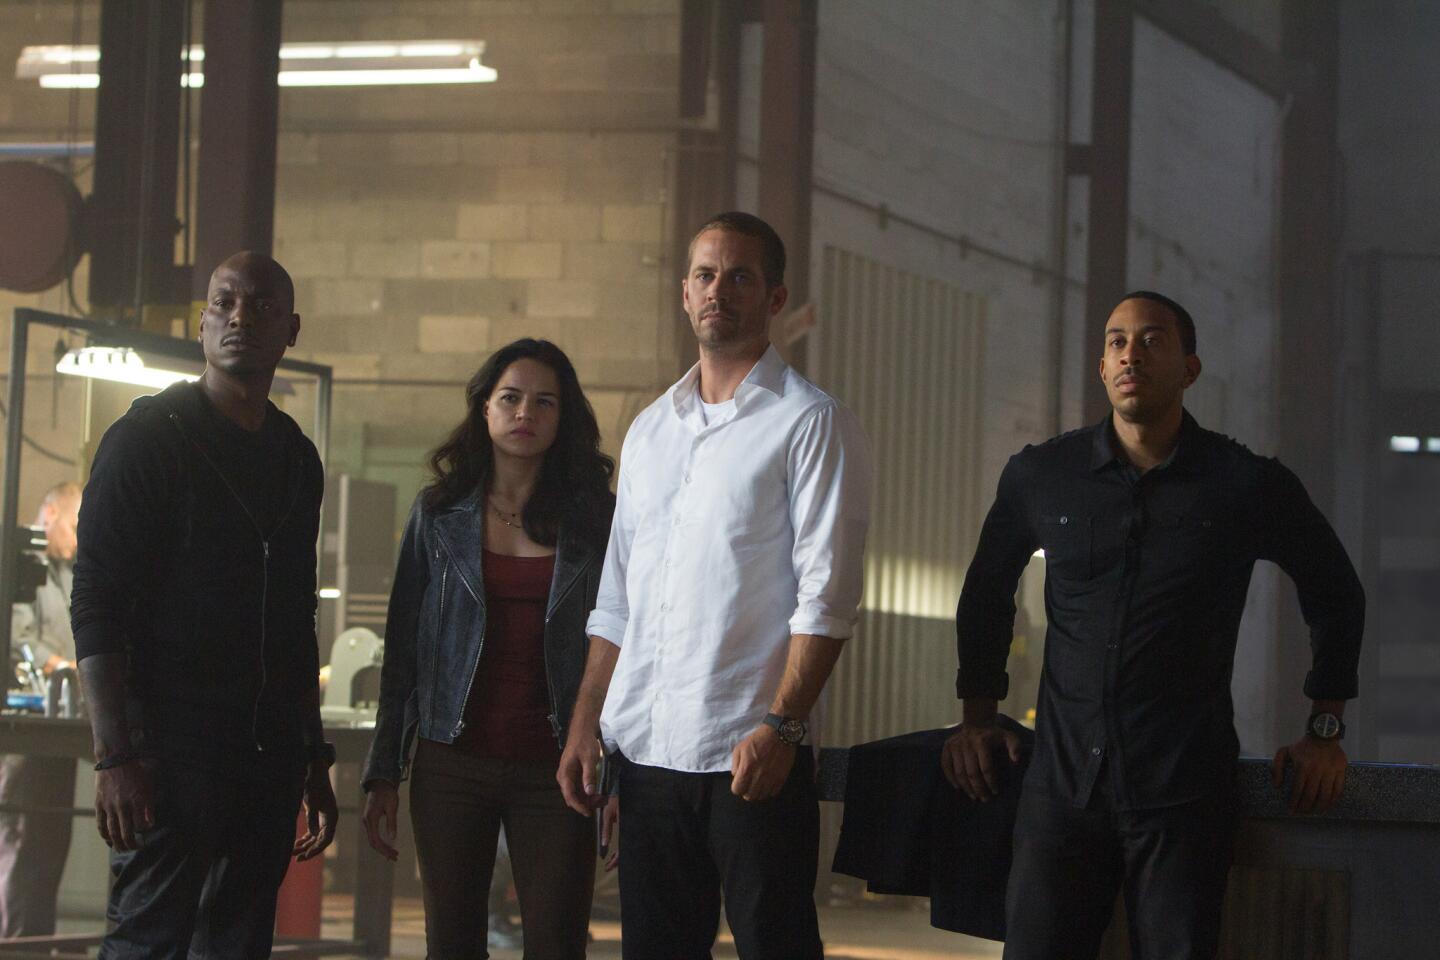 "Furious 7" recently crossed the $1 billion mark at the global box office. After Paul Walker's death in 2013, the script was changed to retire his character and use footage the actor had already shot. The franchise has been an unexpected box-office hit and has built a loyal following, grossing over $3 billion worldwide.